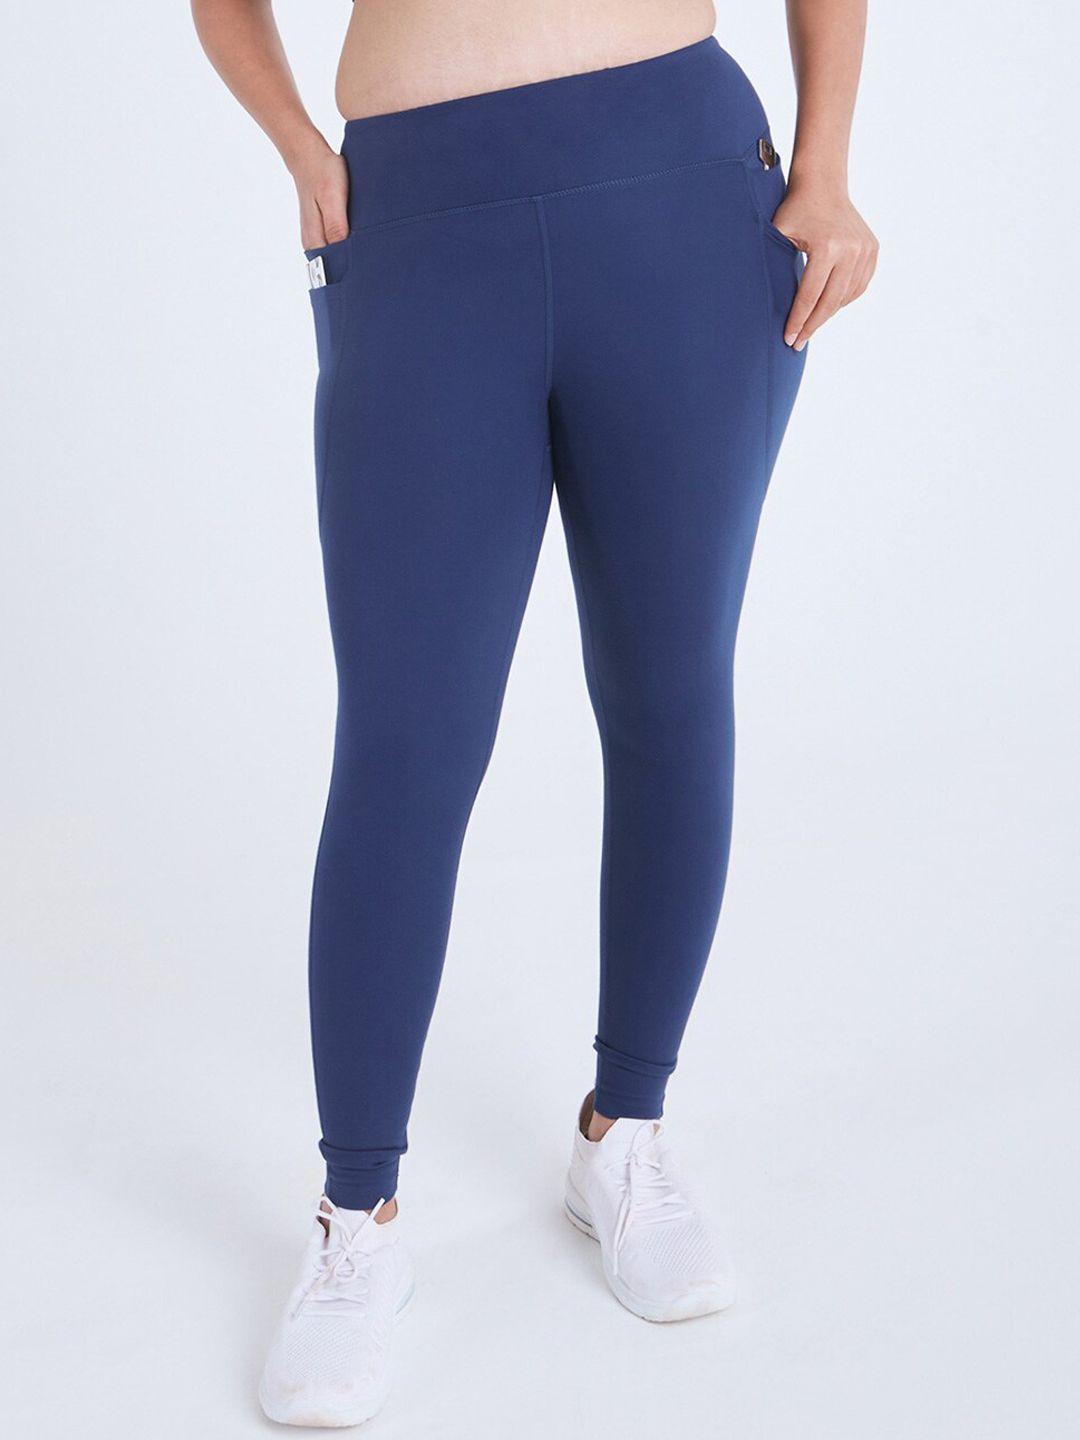 blissclub-the-ultimate-pocket-goals-leggings-with-6-pockets